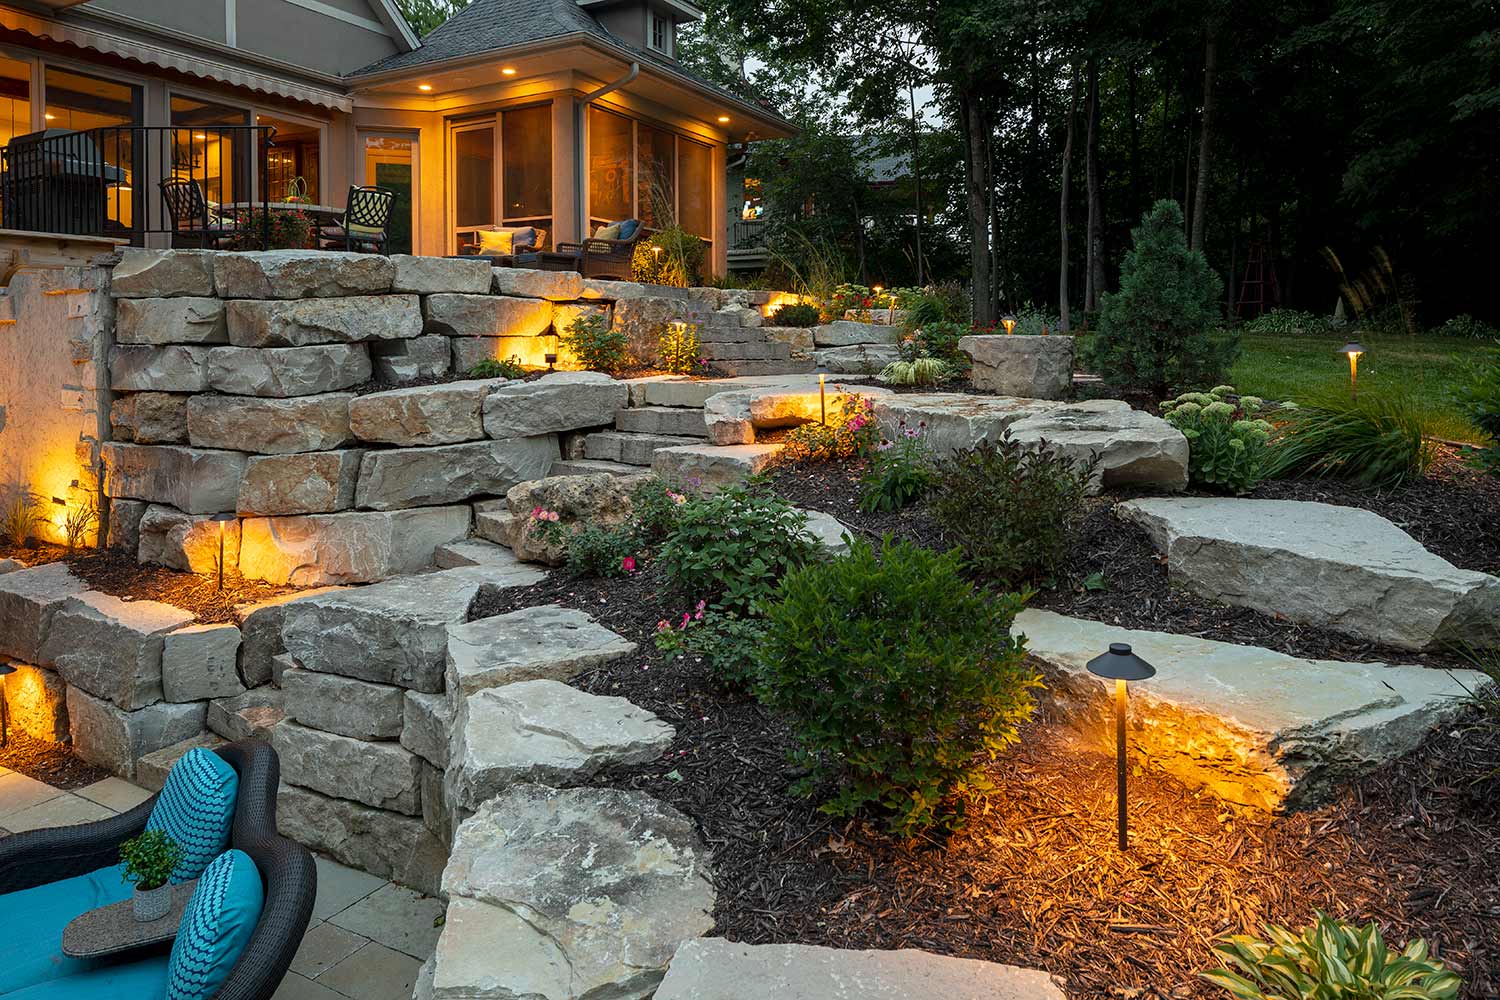 Landscape Lighting-Pasadena TX Landscape Designs & Outdoor Living Areas-We offer Landscape Design, Outdoor Patios & Pergolas, Outdoor Living Spaces, Stonescapes, Residential & Commercial Landscaping, Irrigation Installation & Repairs, Drainage Systems, Landscape Lighting, Outdoor Living Spaces, Tree Service, Lawn Service, and more.